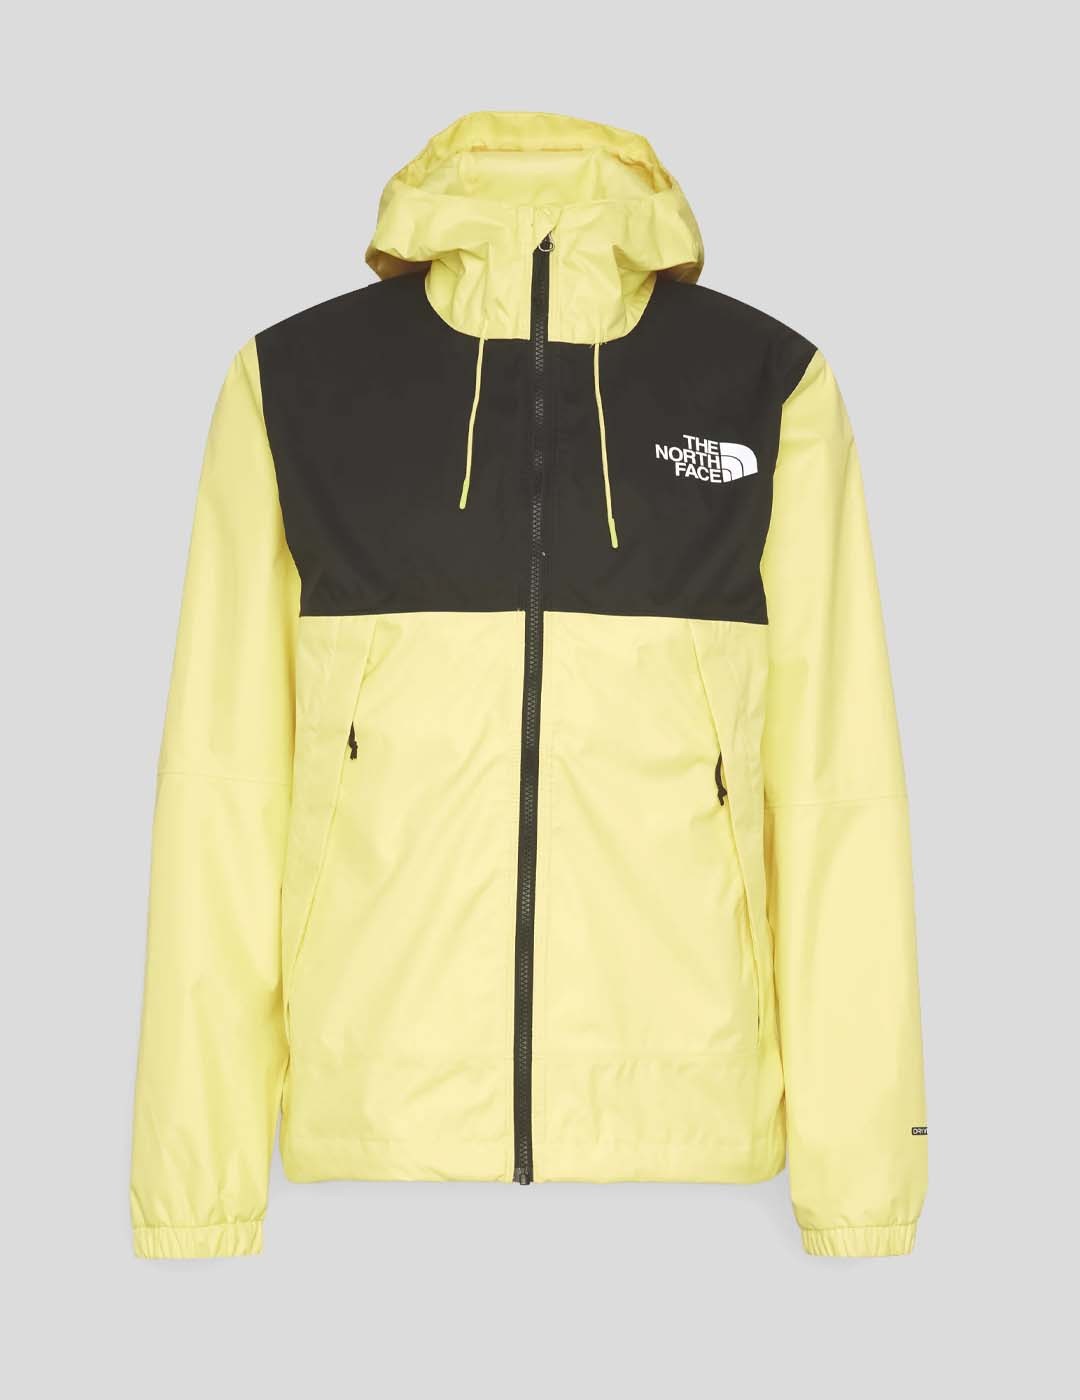 CHAQUETA THE NORTH FACE 1990 MOUNTAIN Q JACKET YELLOW TAIL